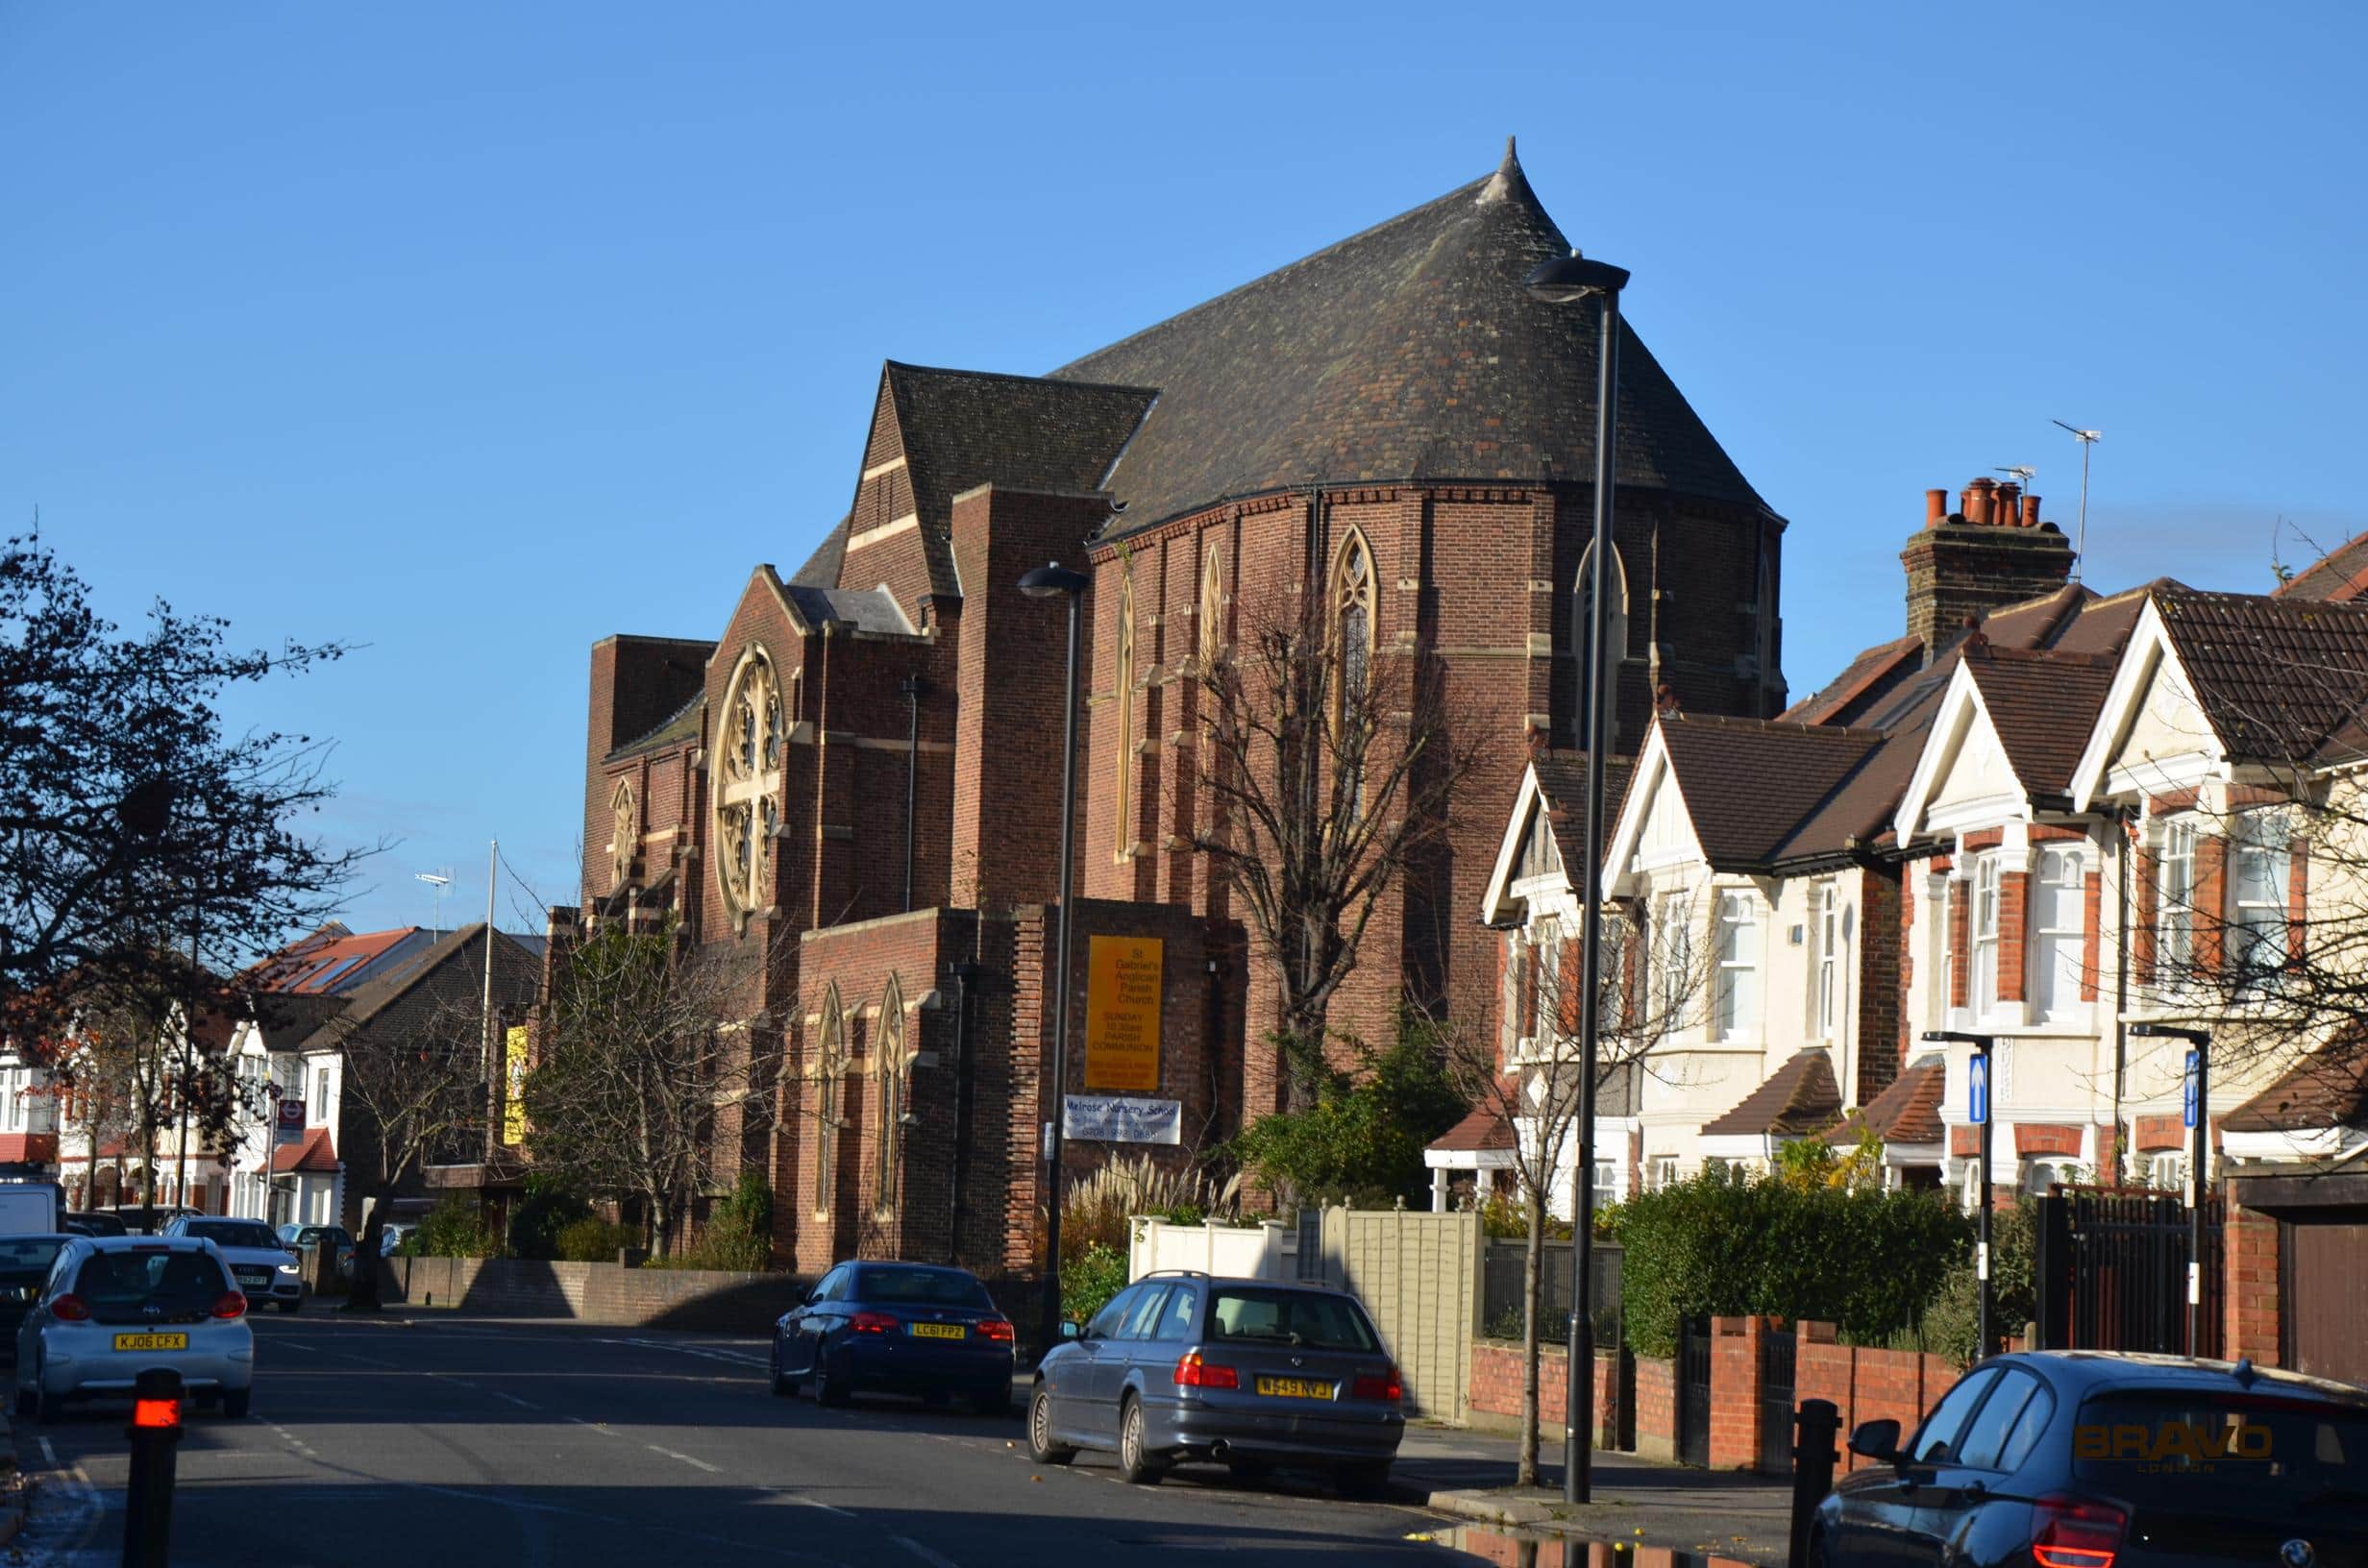 A large red brick church with a prominent arched roofline flanked by smaller buildings, featuring bespoke furniture, located on a sunny suburban street lined with parked cars.